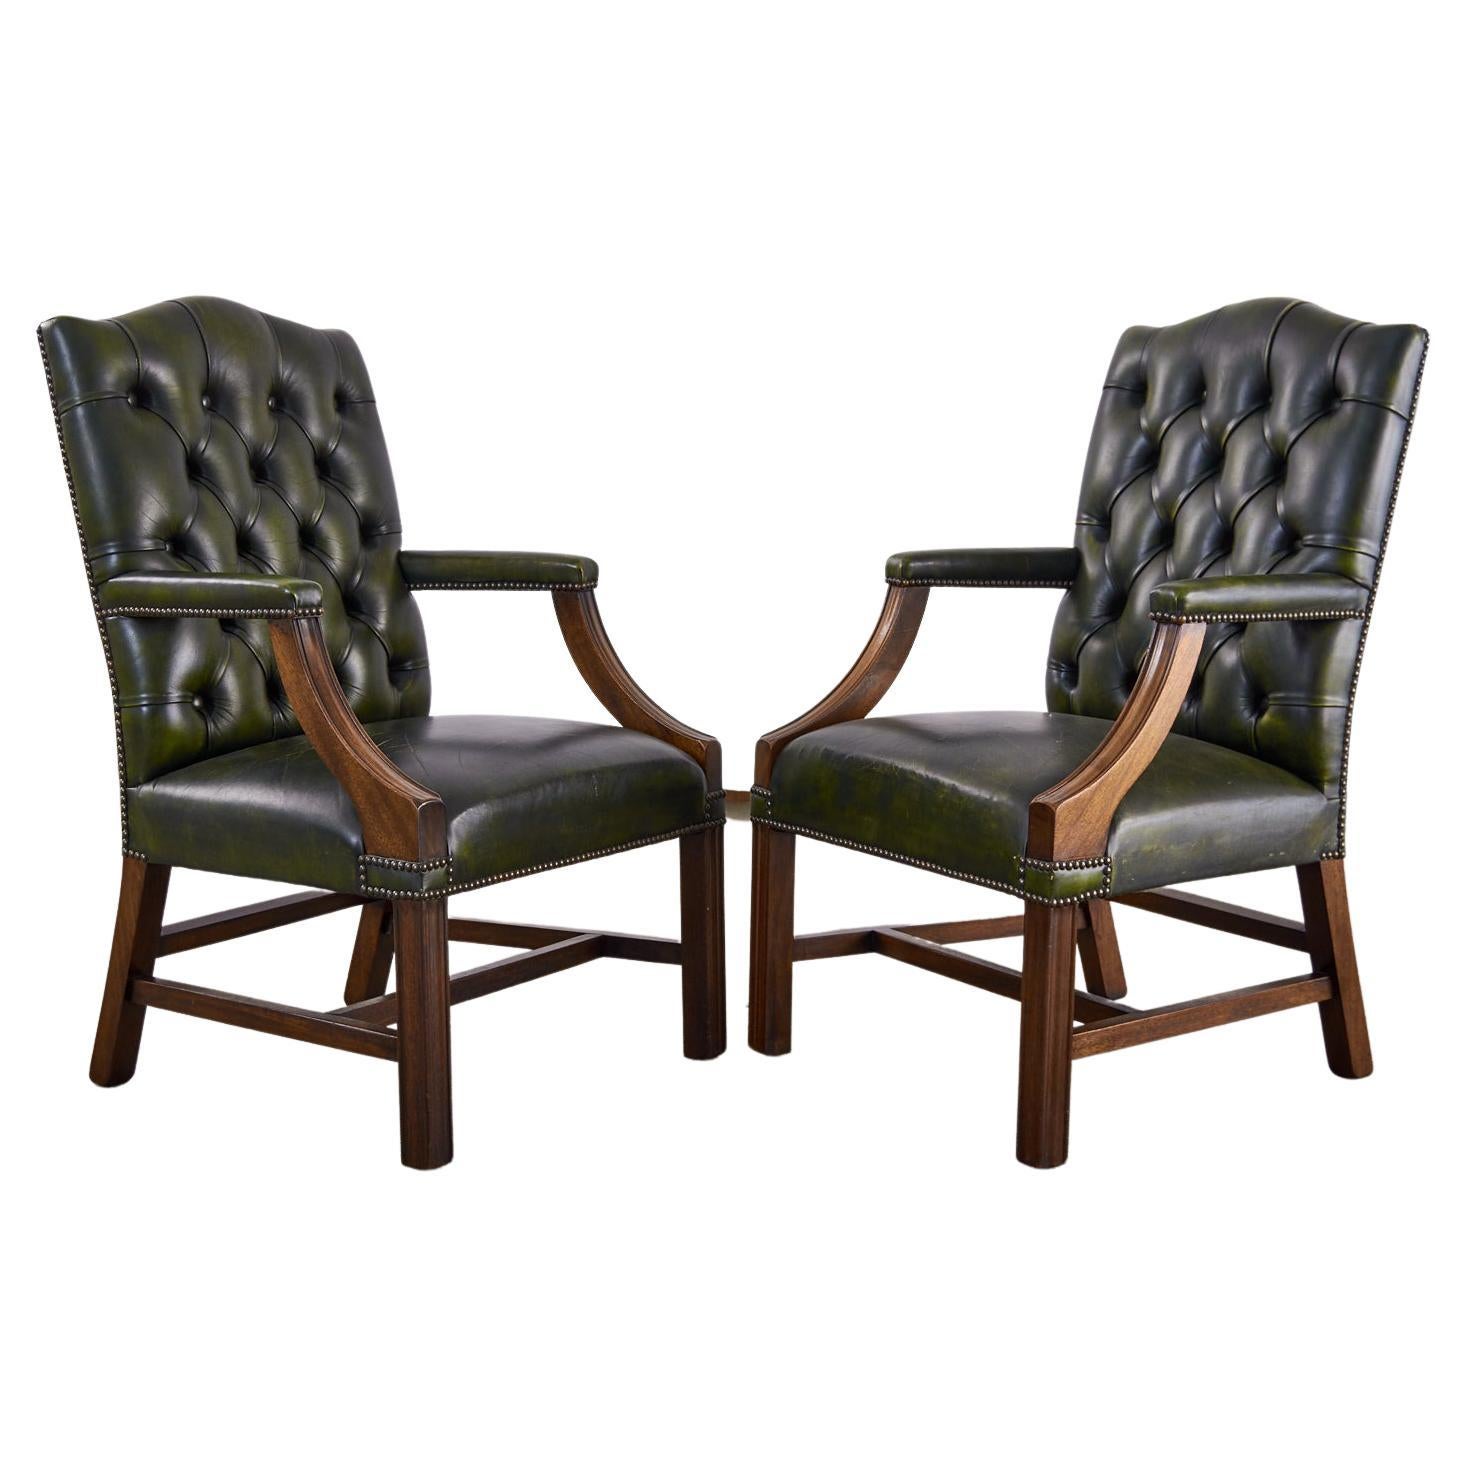 Pair of English Georgian Style Gainsborough Library Chairs 